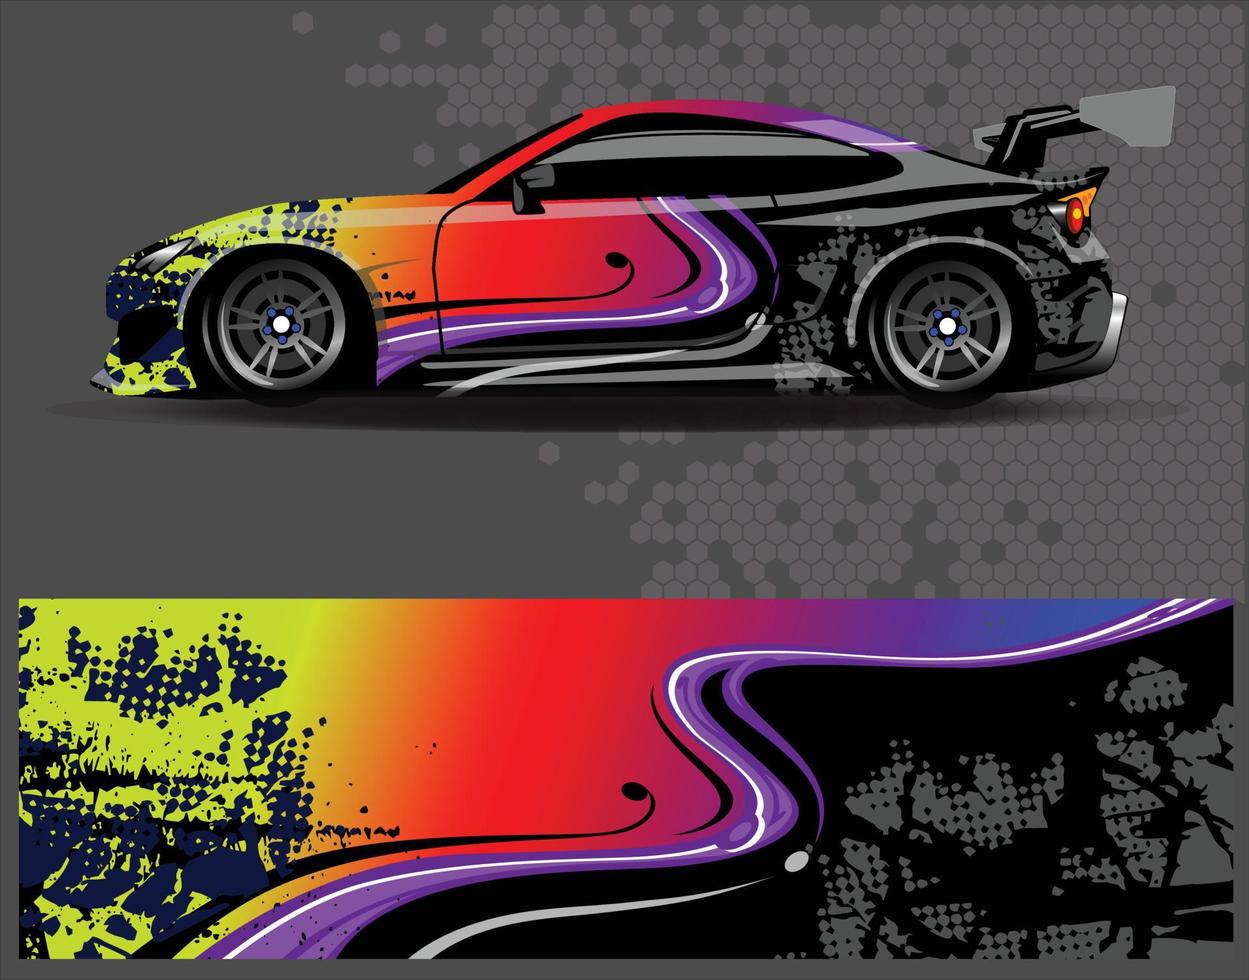 Car wrap decal graphics. Abstract eagle stripe  grunge racing and sport background for racing livery or daily use car vinyl sticker vector